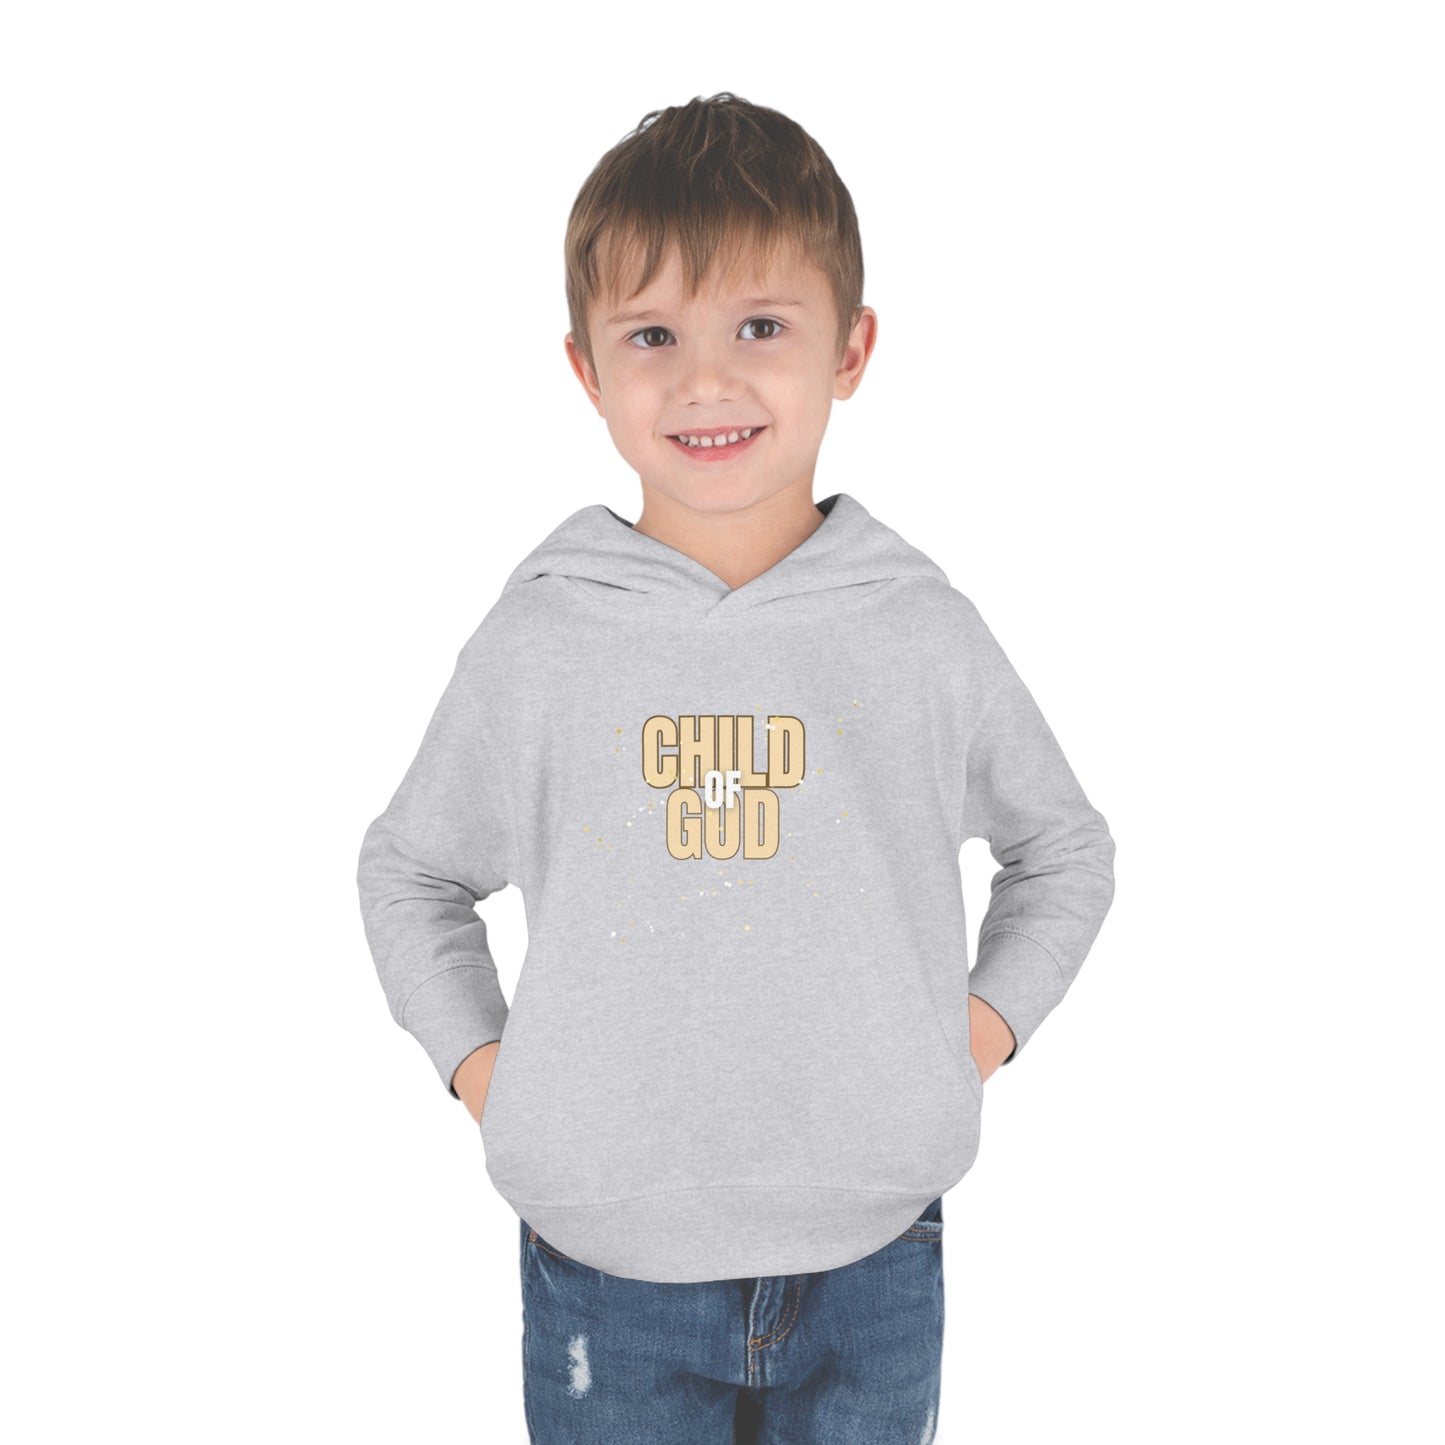 Child Of God Pullover Fleece Children's Hoodie, Christian Pullover for Kids, Jesus Hoodie, Toddler & Youth Faith Apparel, Kids Faith Hoodie